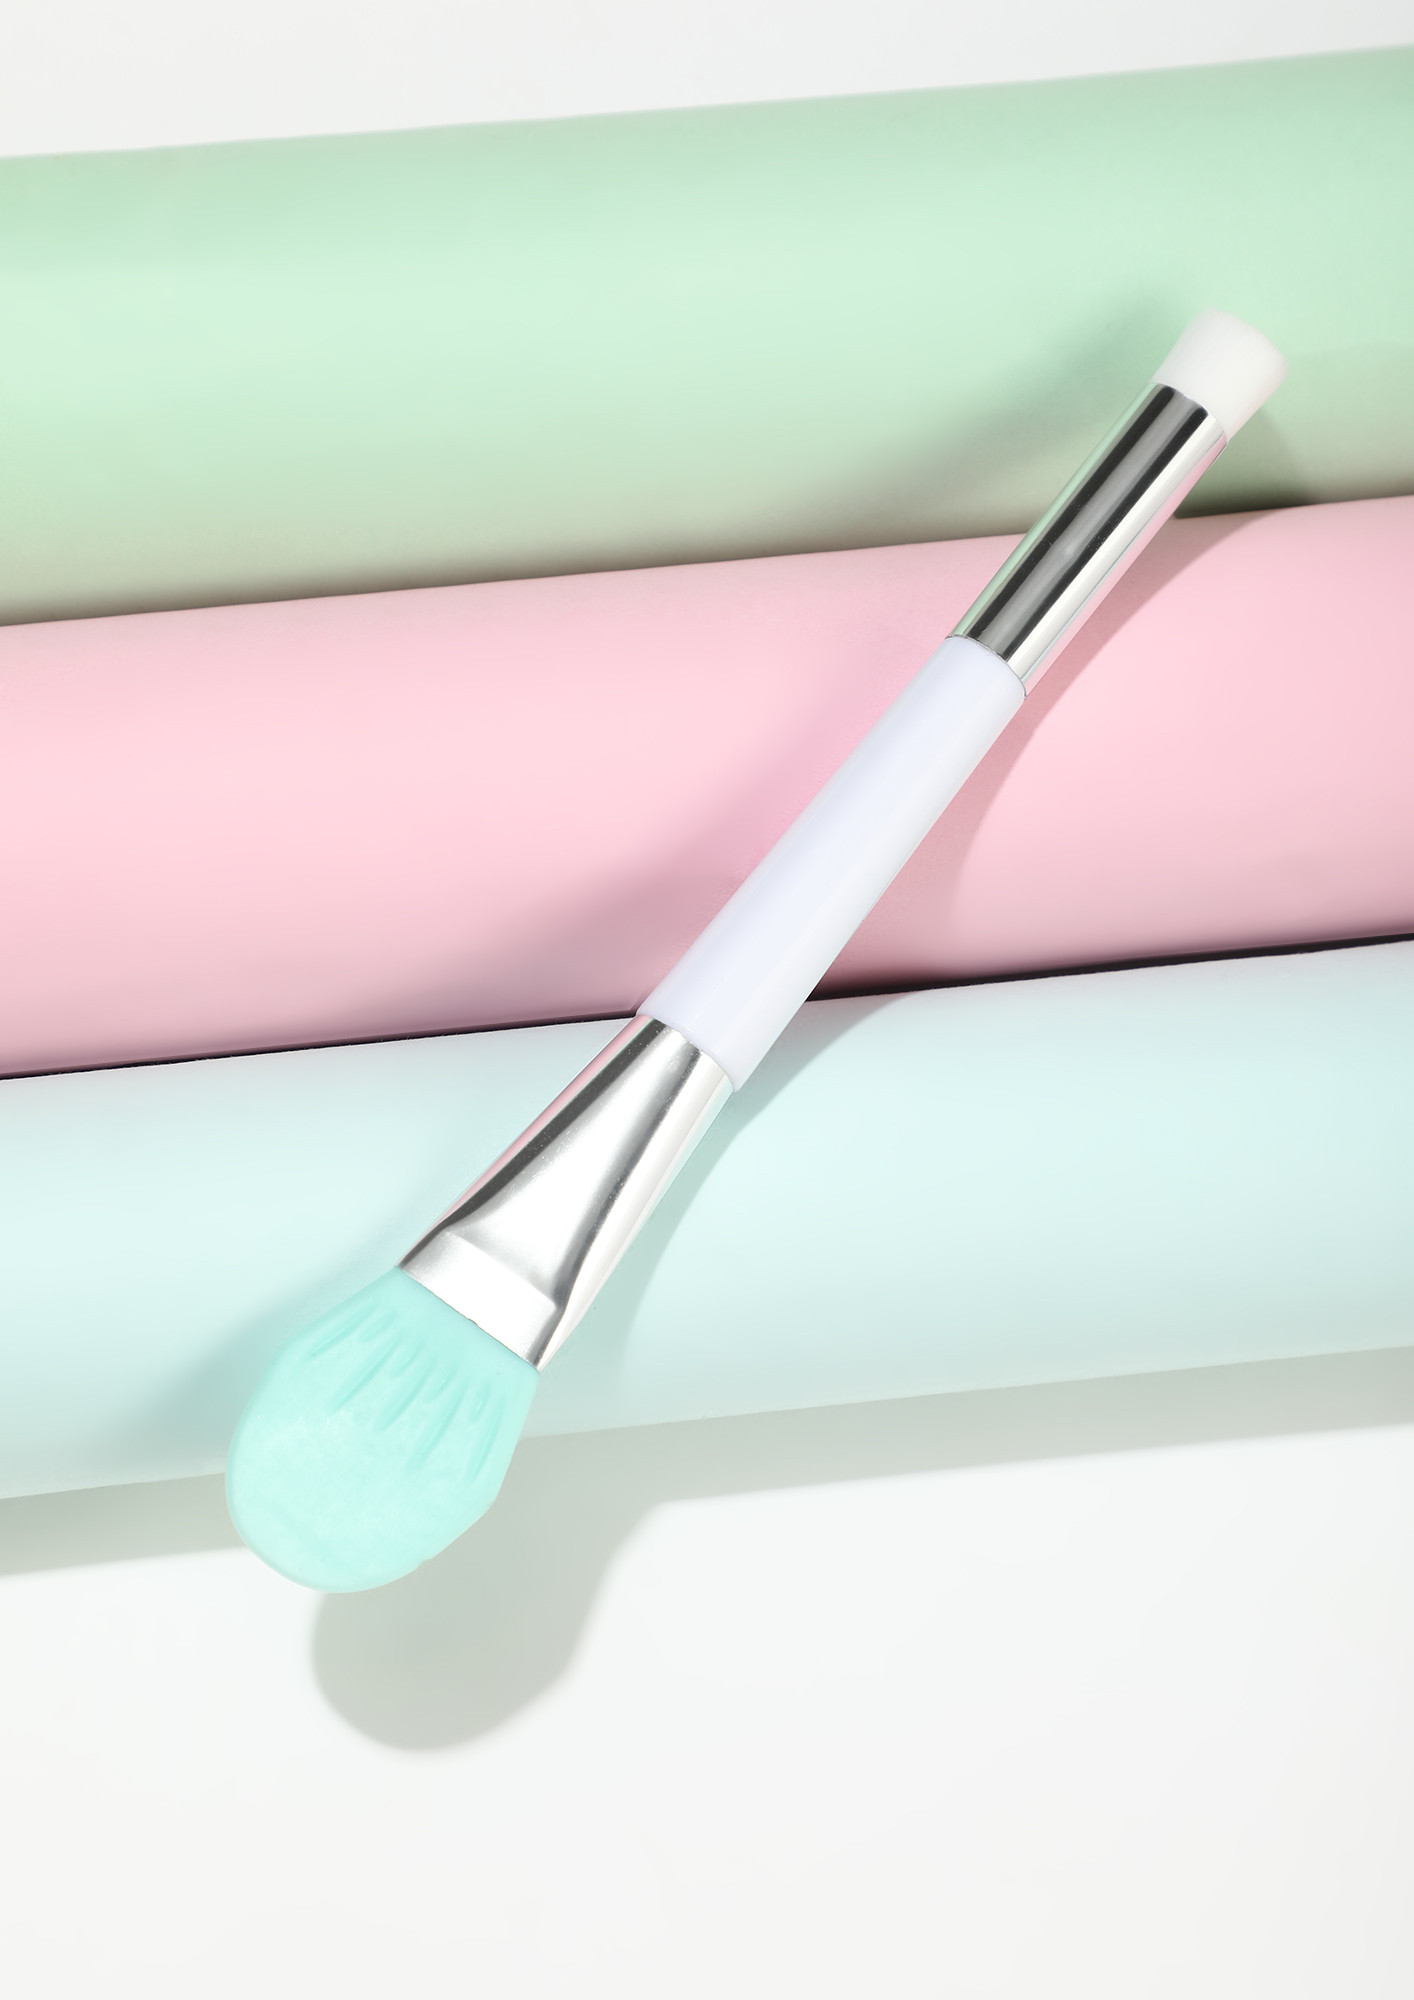 EVERYDAY BLUE SILICONE MAKEUP BRUSH